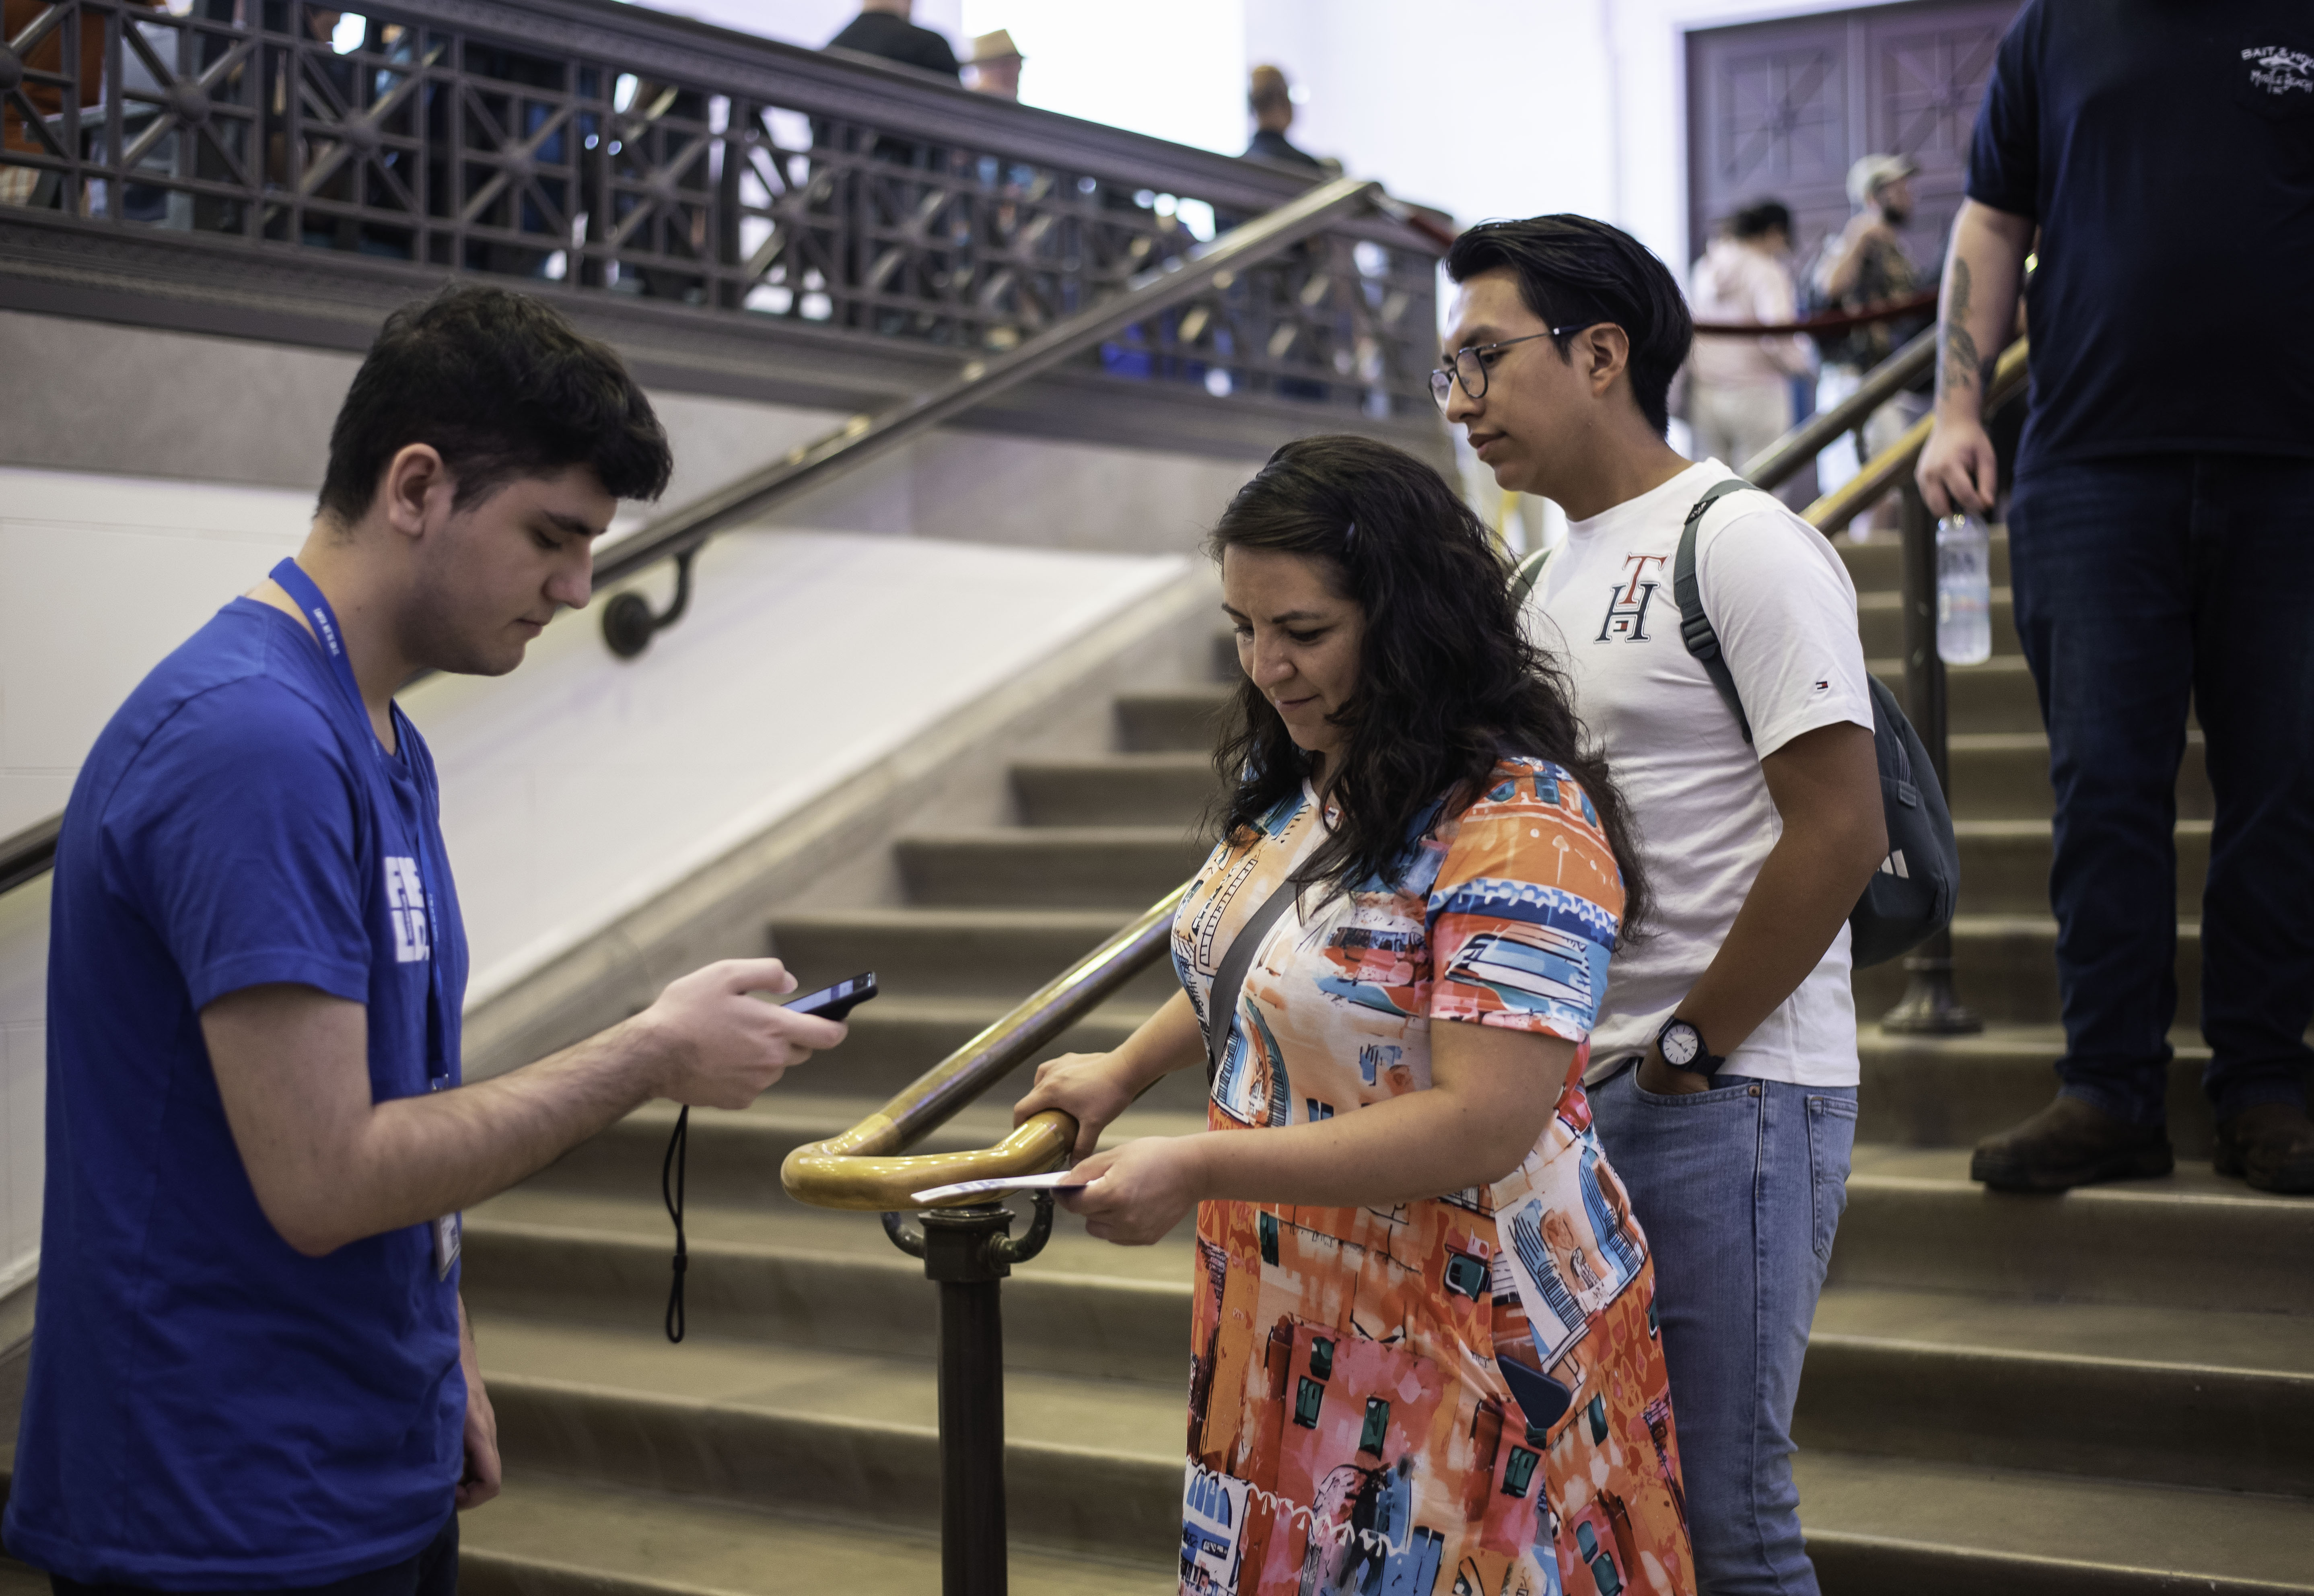 Museum visitors interact with a staff member while on stairs